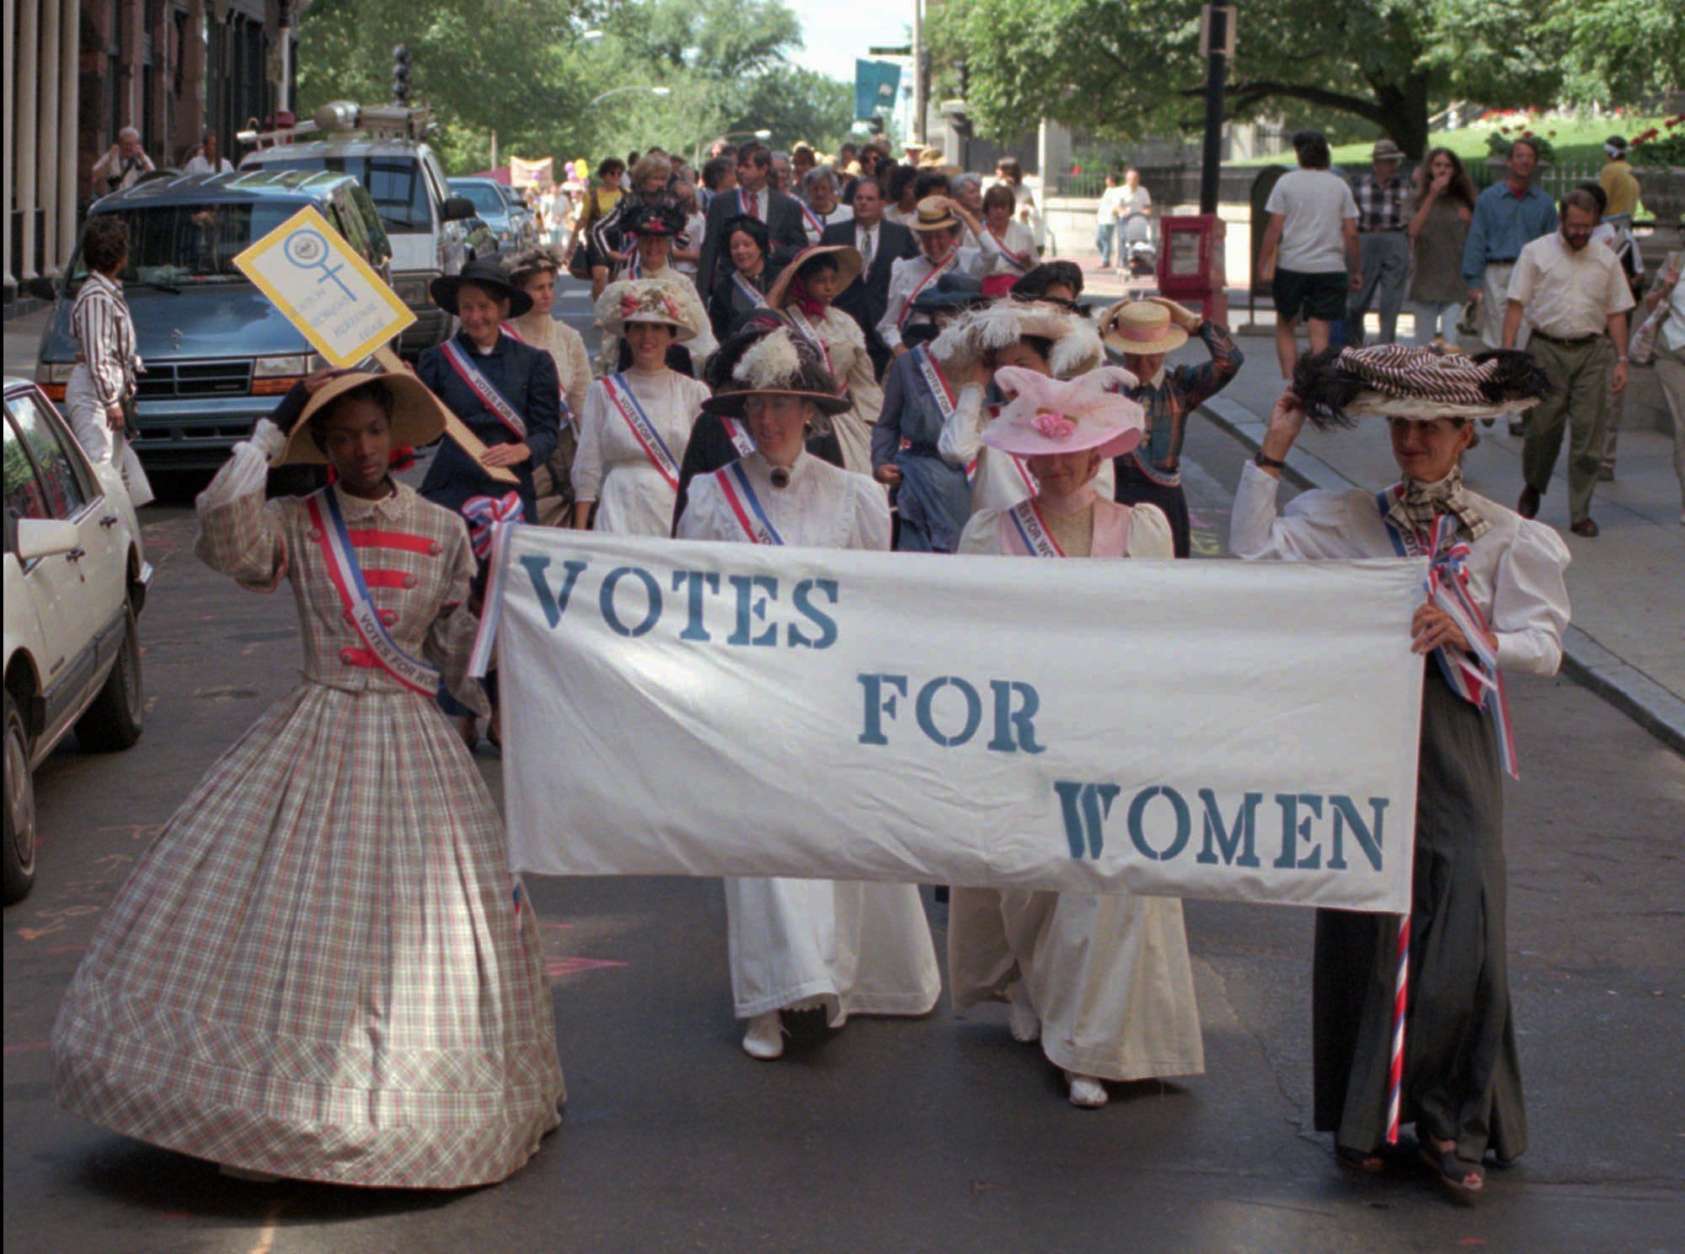 A parade to commemorate the 75th anniversary of women's suffrage proceeds down Beacon St. enroute from the Statehouse to Faneuil Hall in Boston Friday, August 25, 1995. Leading the parade, from left, are Chanel Lewis of New Orleans, Helen Hannon of Somerville, Mass., Judi Wright of Boston, and Linda McLaughlin of Marblehead, Mass. (AP Photo/Julia Malakie)